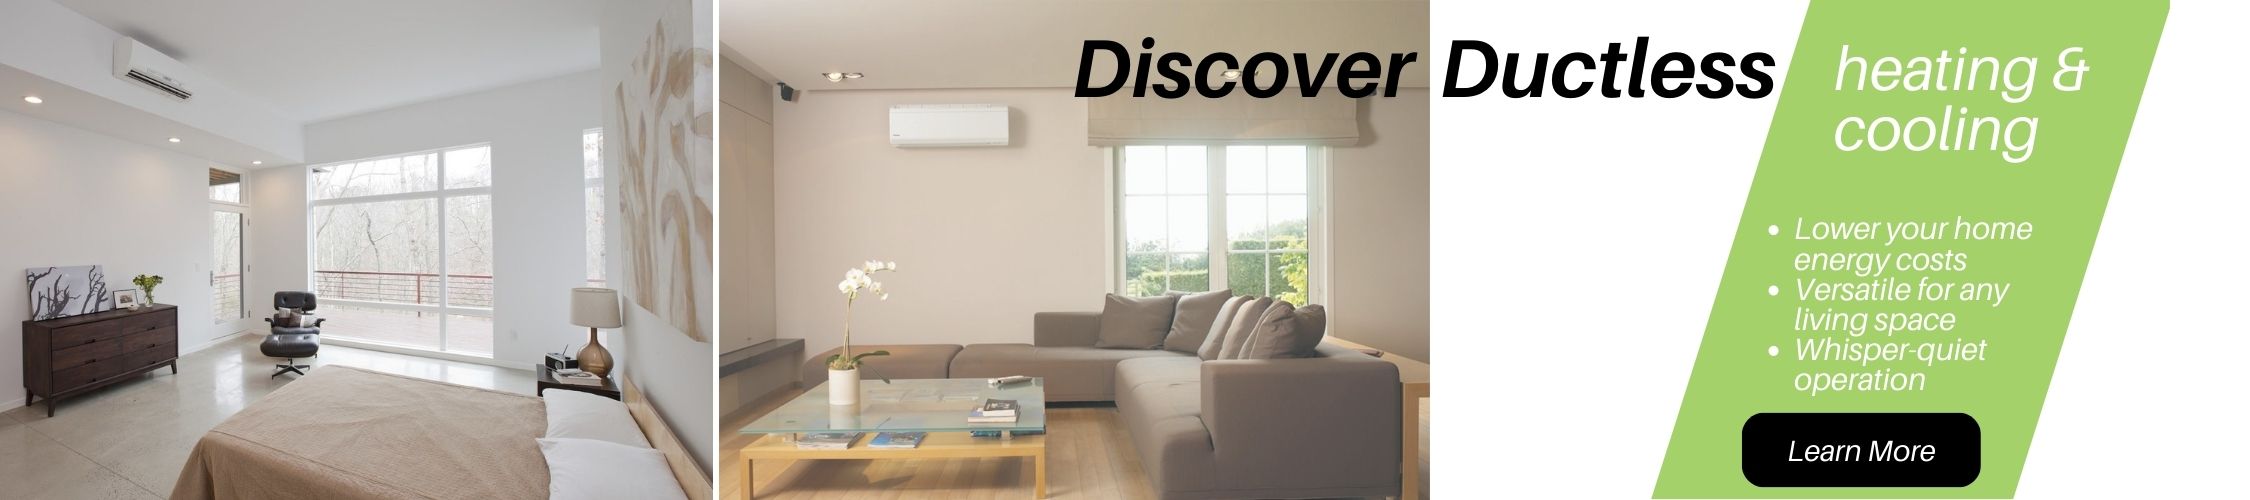 Discover Ductless heating & cooling for efficient home comfort